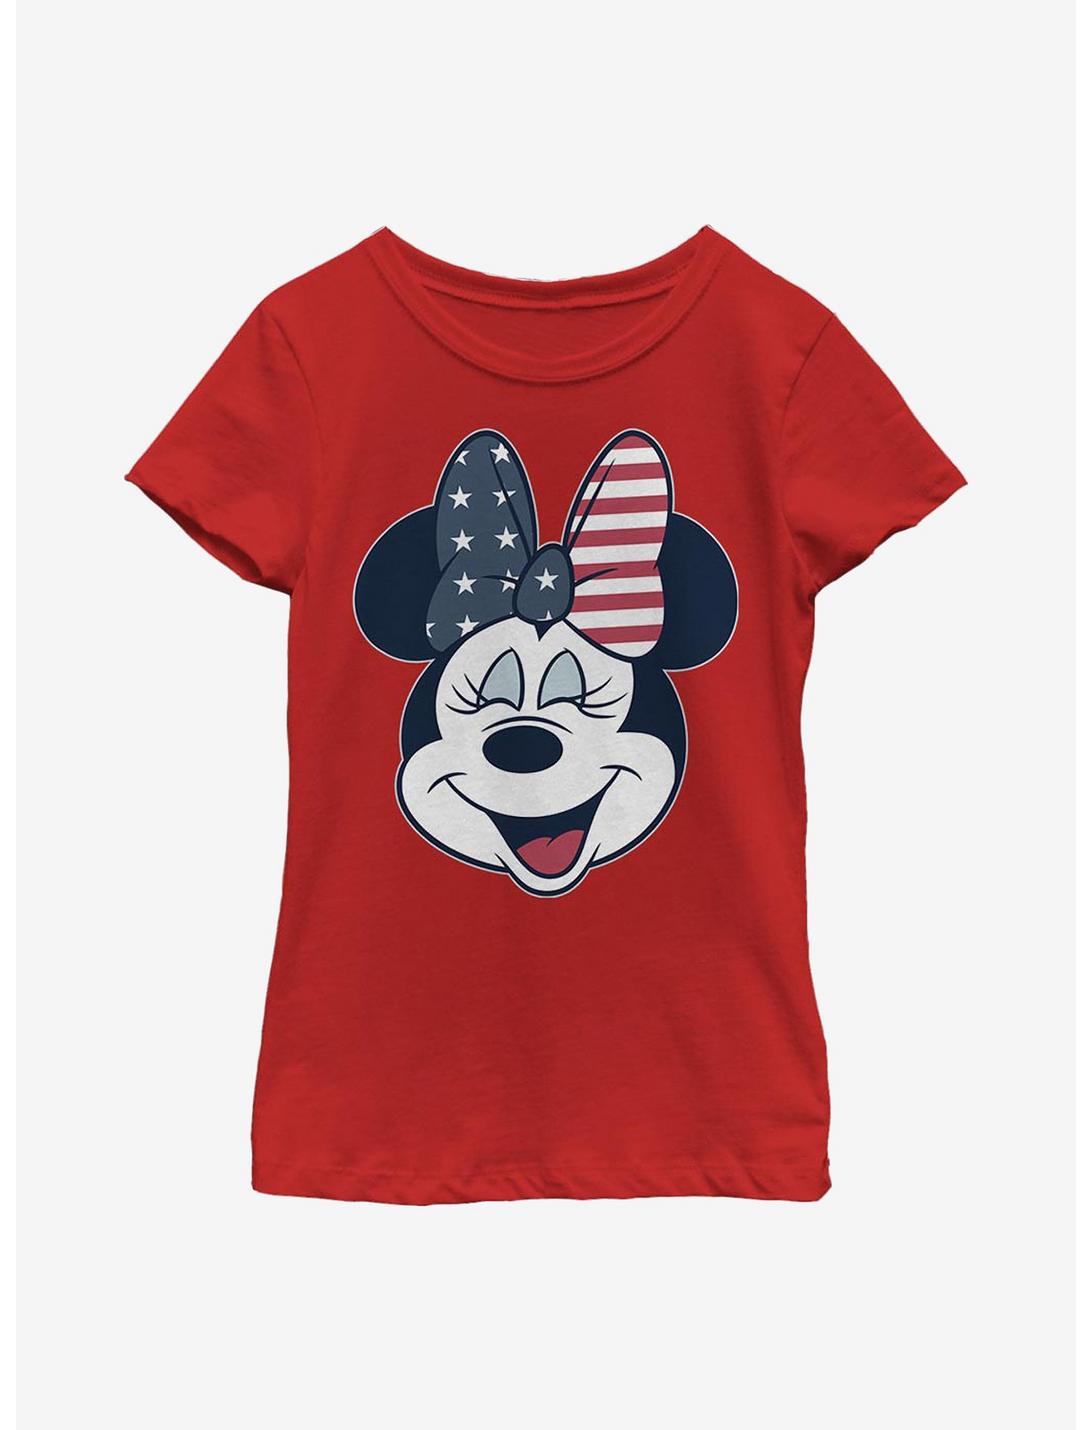 Disney Minnie Mouse American Bow Youth Girls T-Shirt, RED, hi-res